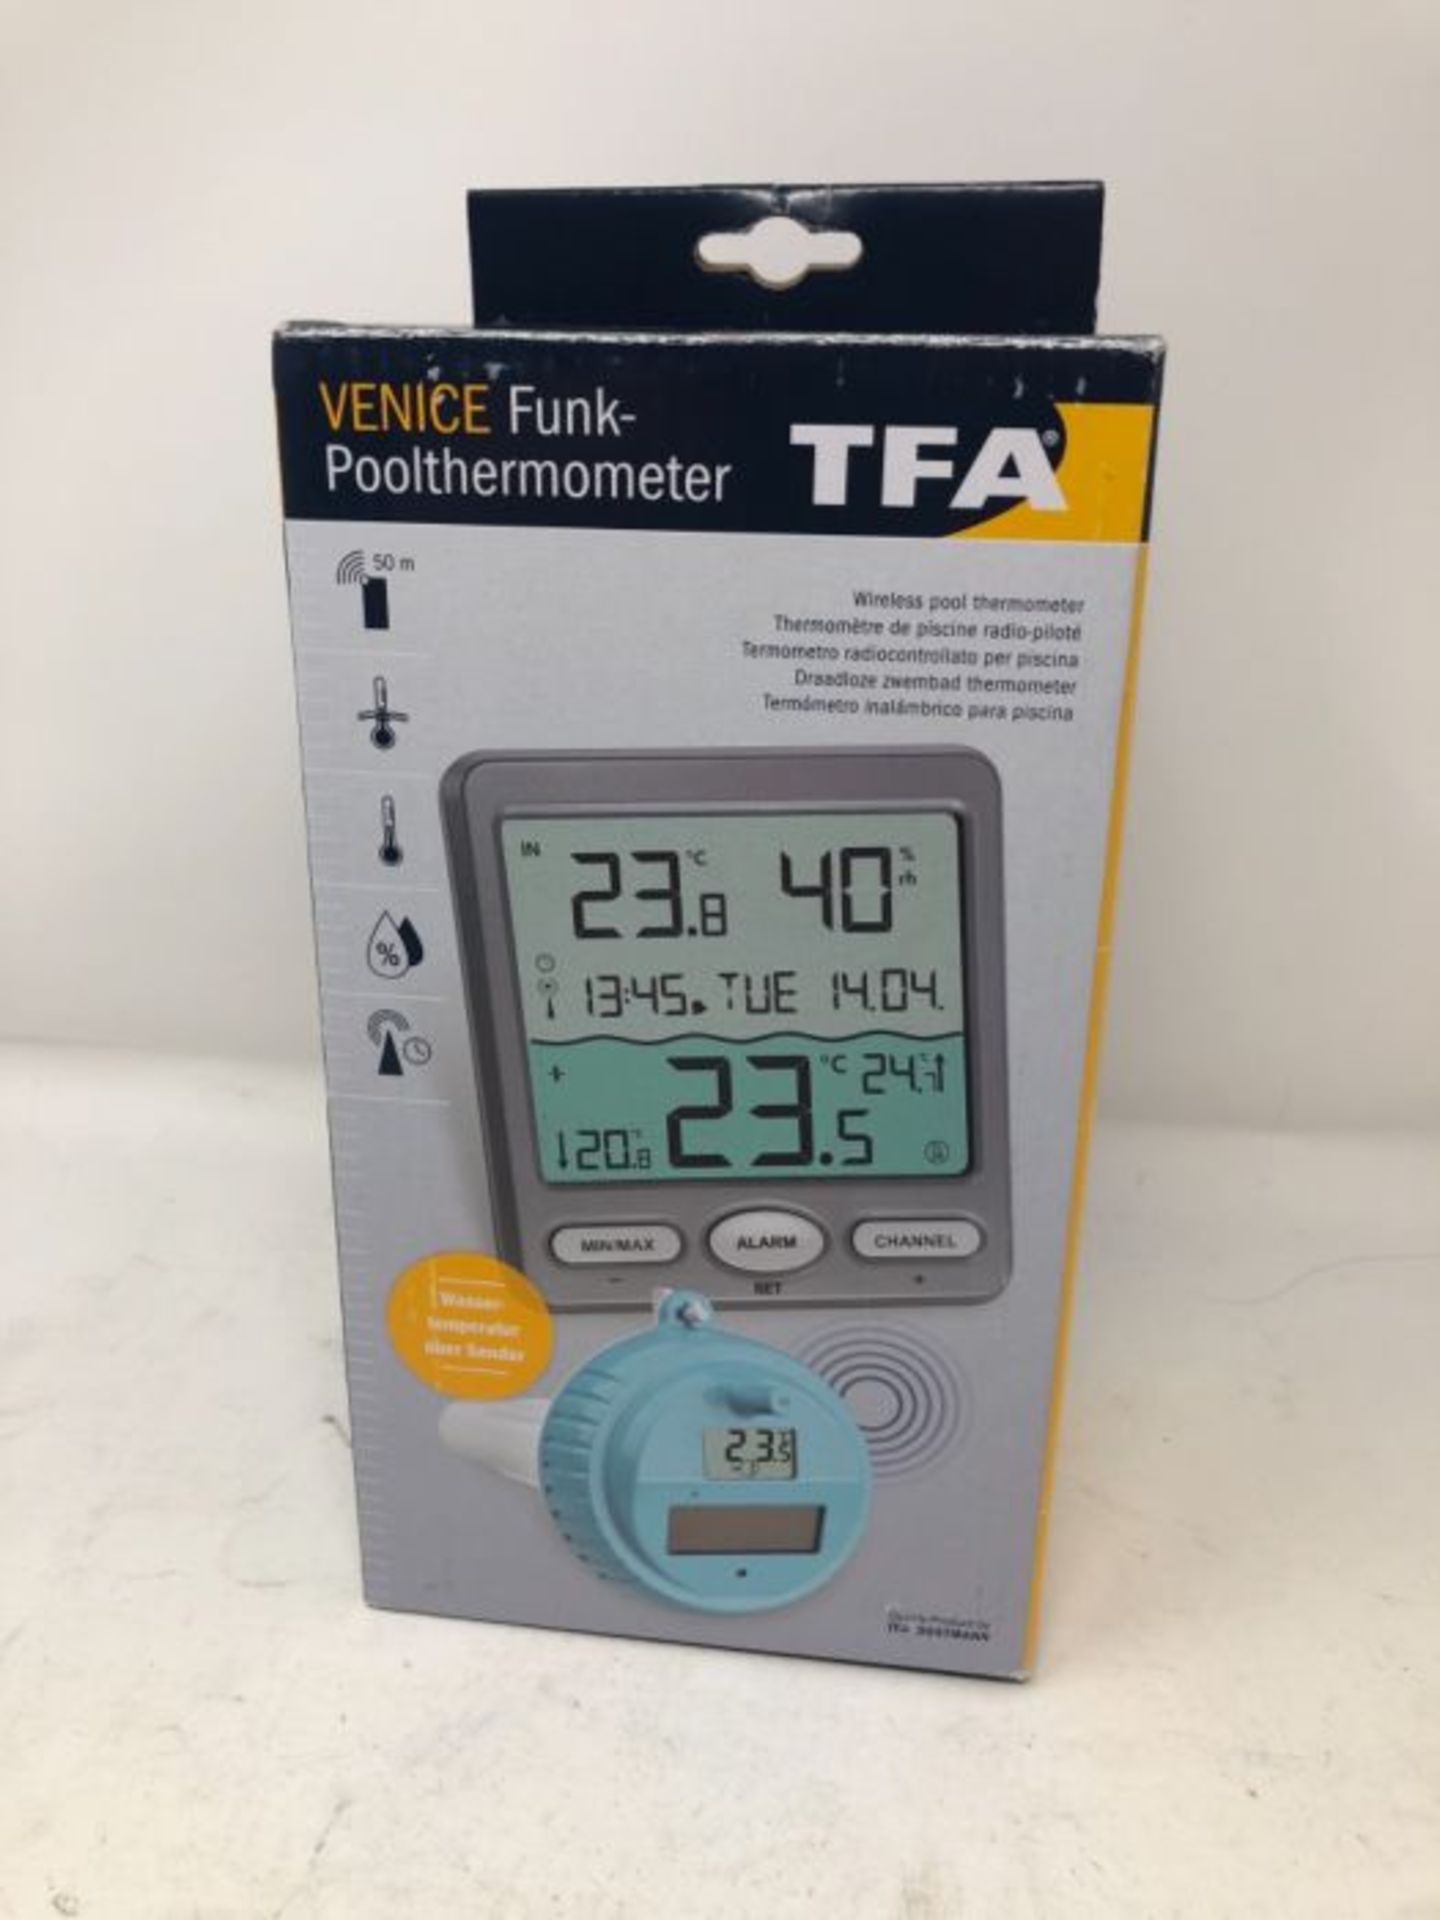 TFA Dostmann Pool Thermometer VENICE 30,3056,10, for Monitoring of Temperature of Wate - Image 2 of 3